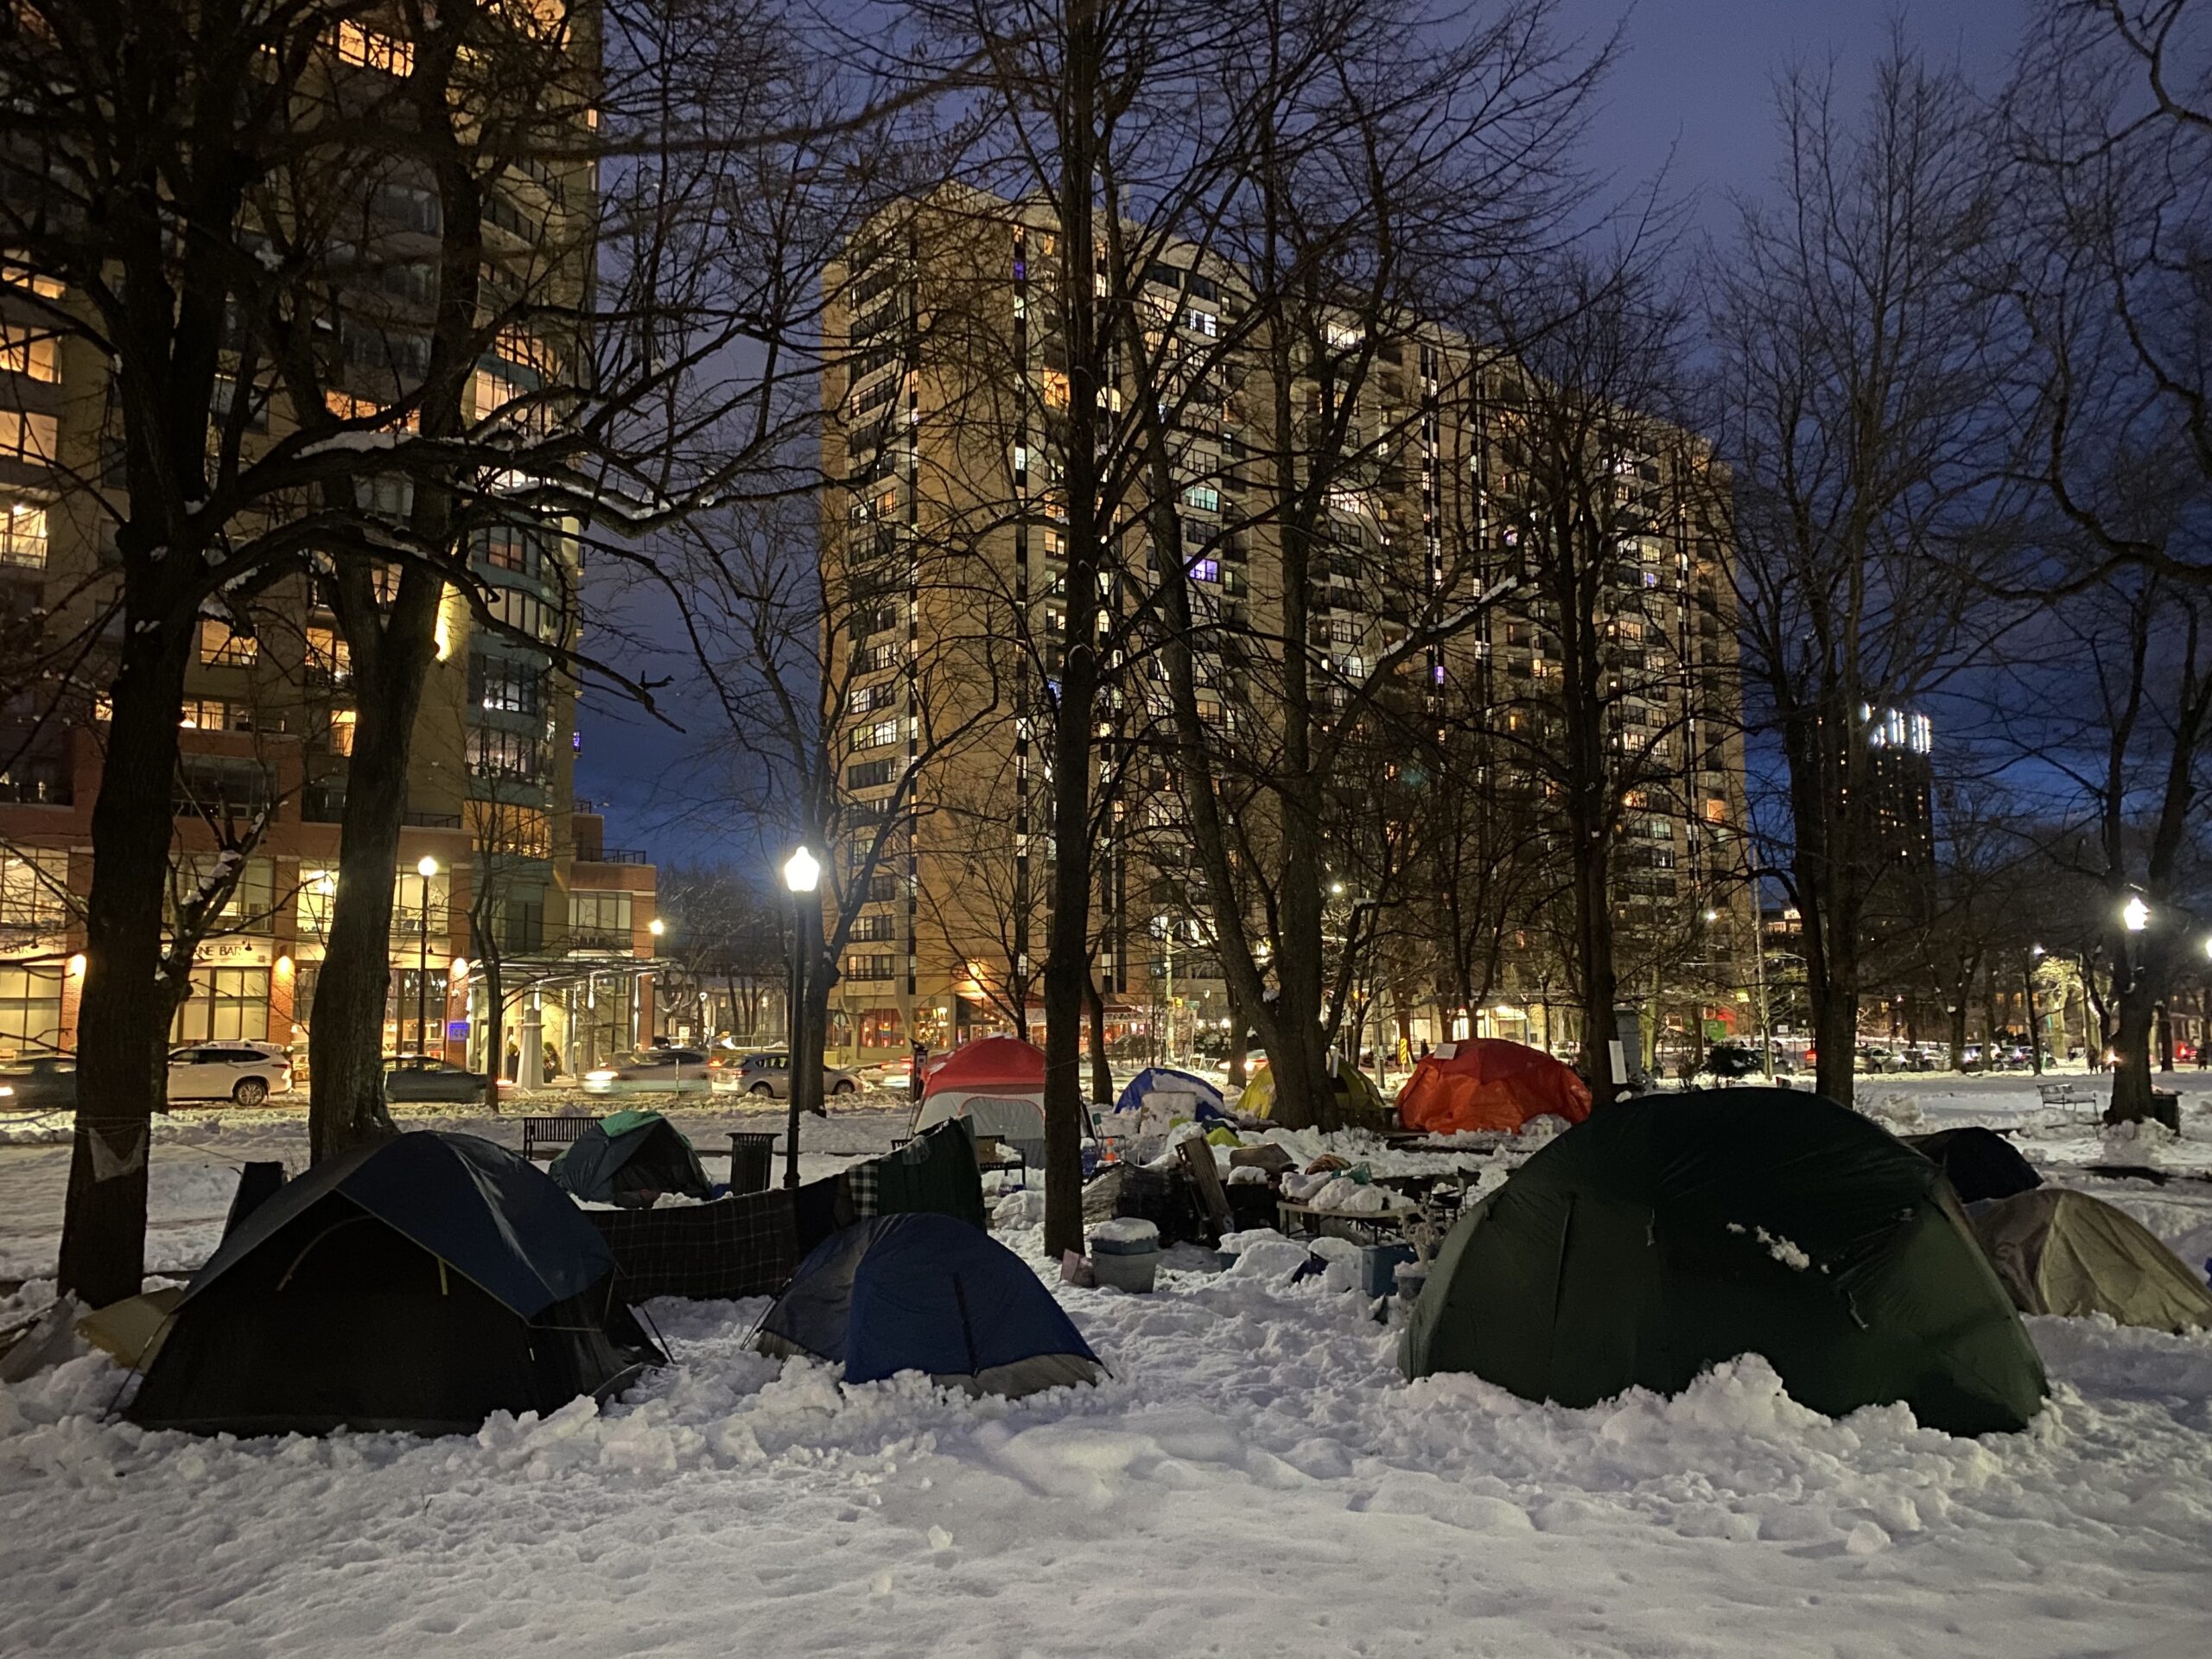 Tents in the snow in Downtown Halifax